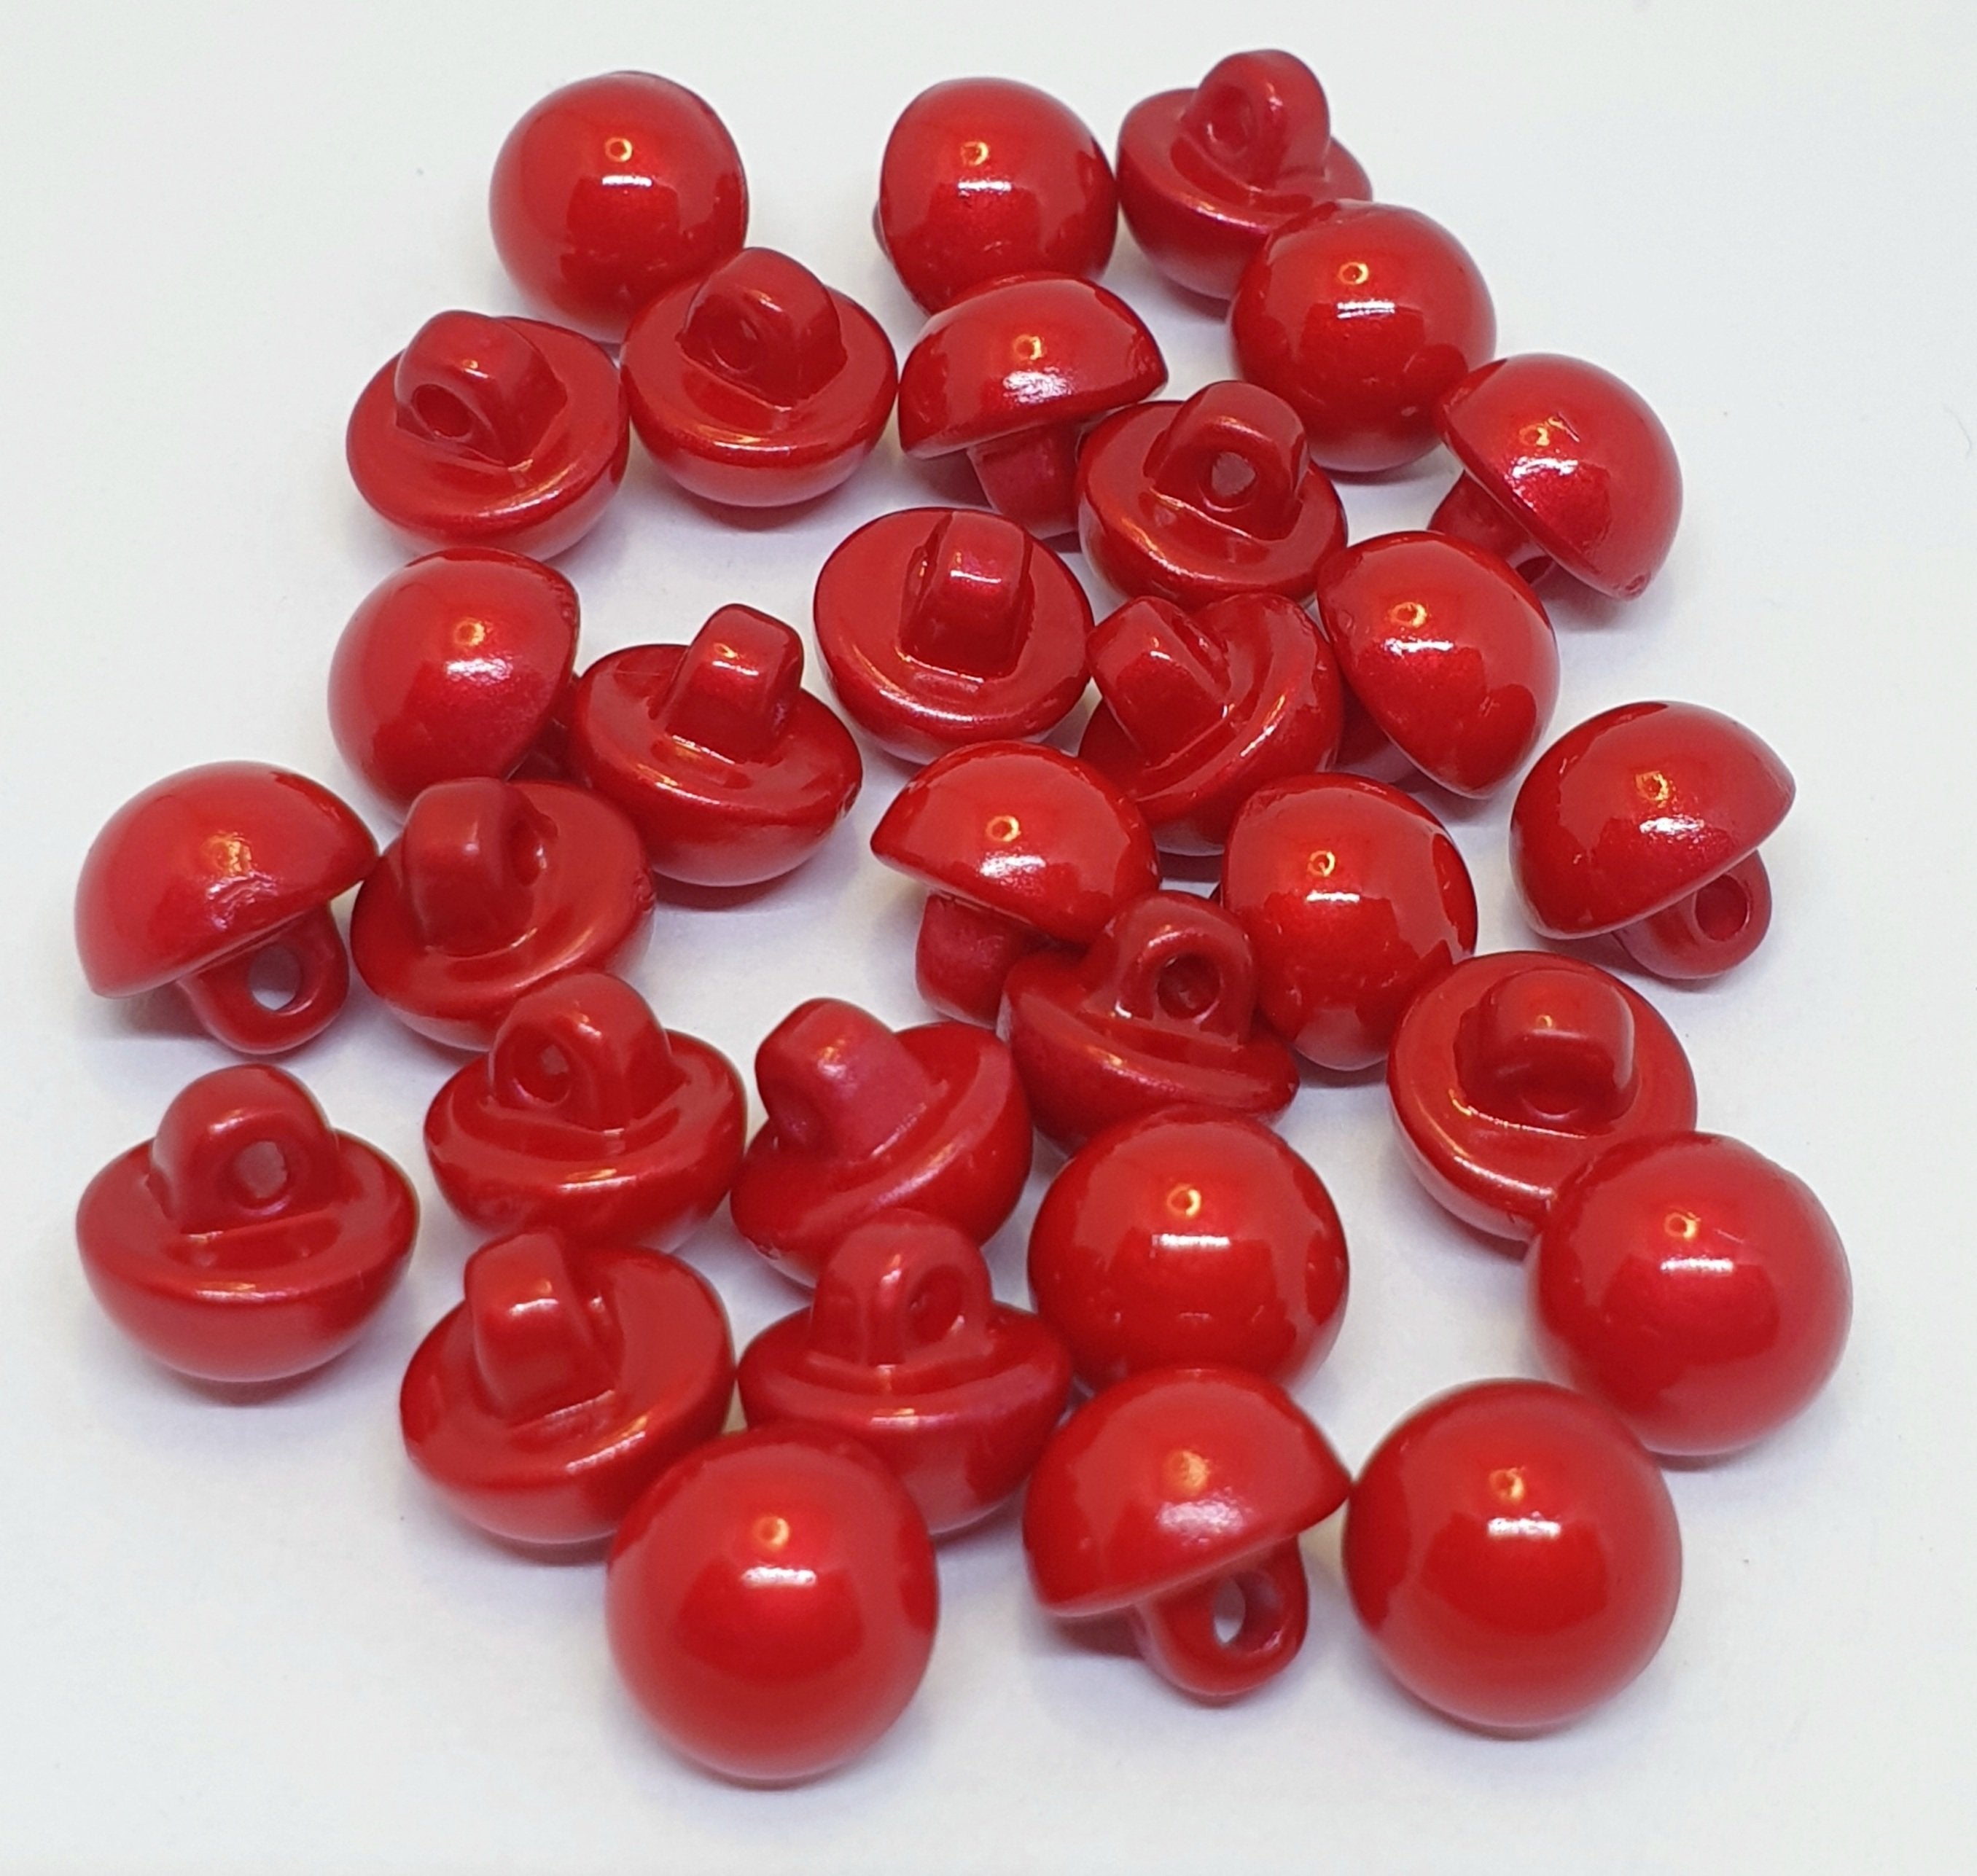 MajorCrafts 30pcs 10mm Red High-Grade Acrylic Small Round Sewing Mushroom Shank Buttons